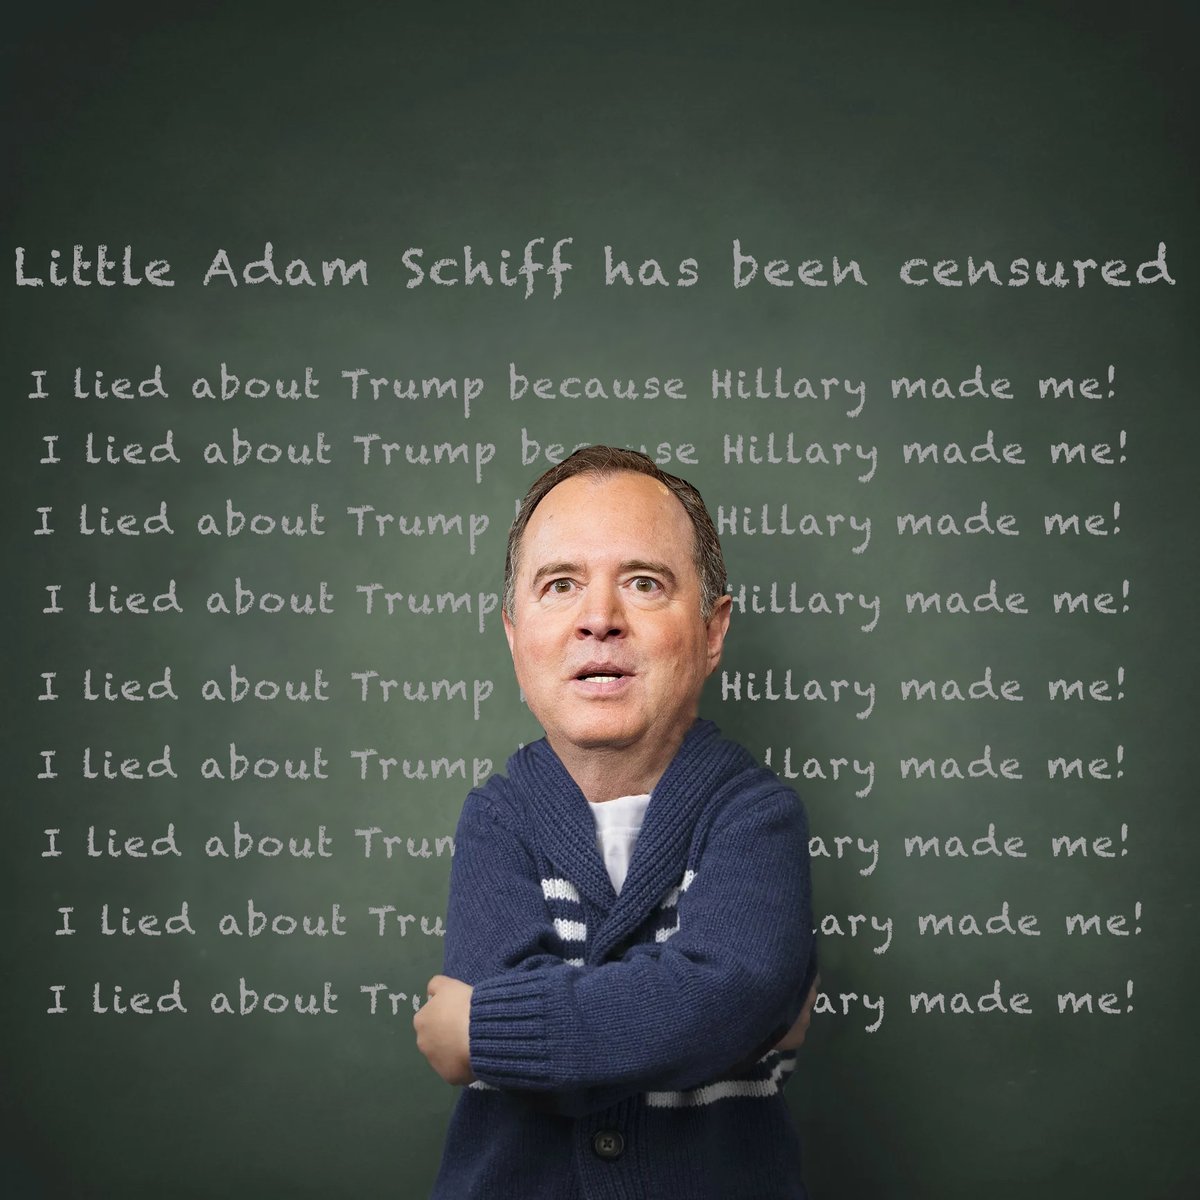 @AdamSchiff You are now censured in the House of Representatives. That label will stay with you forever. So enjoy...